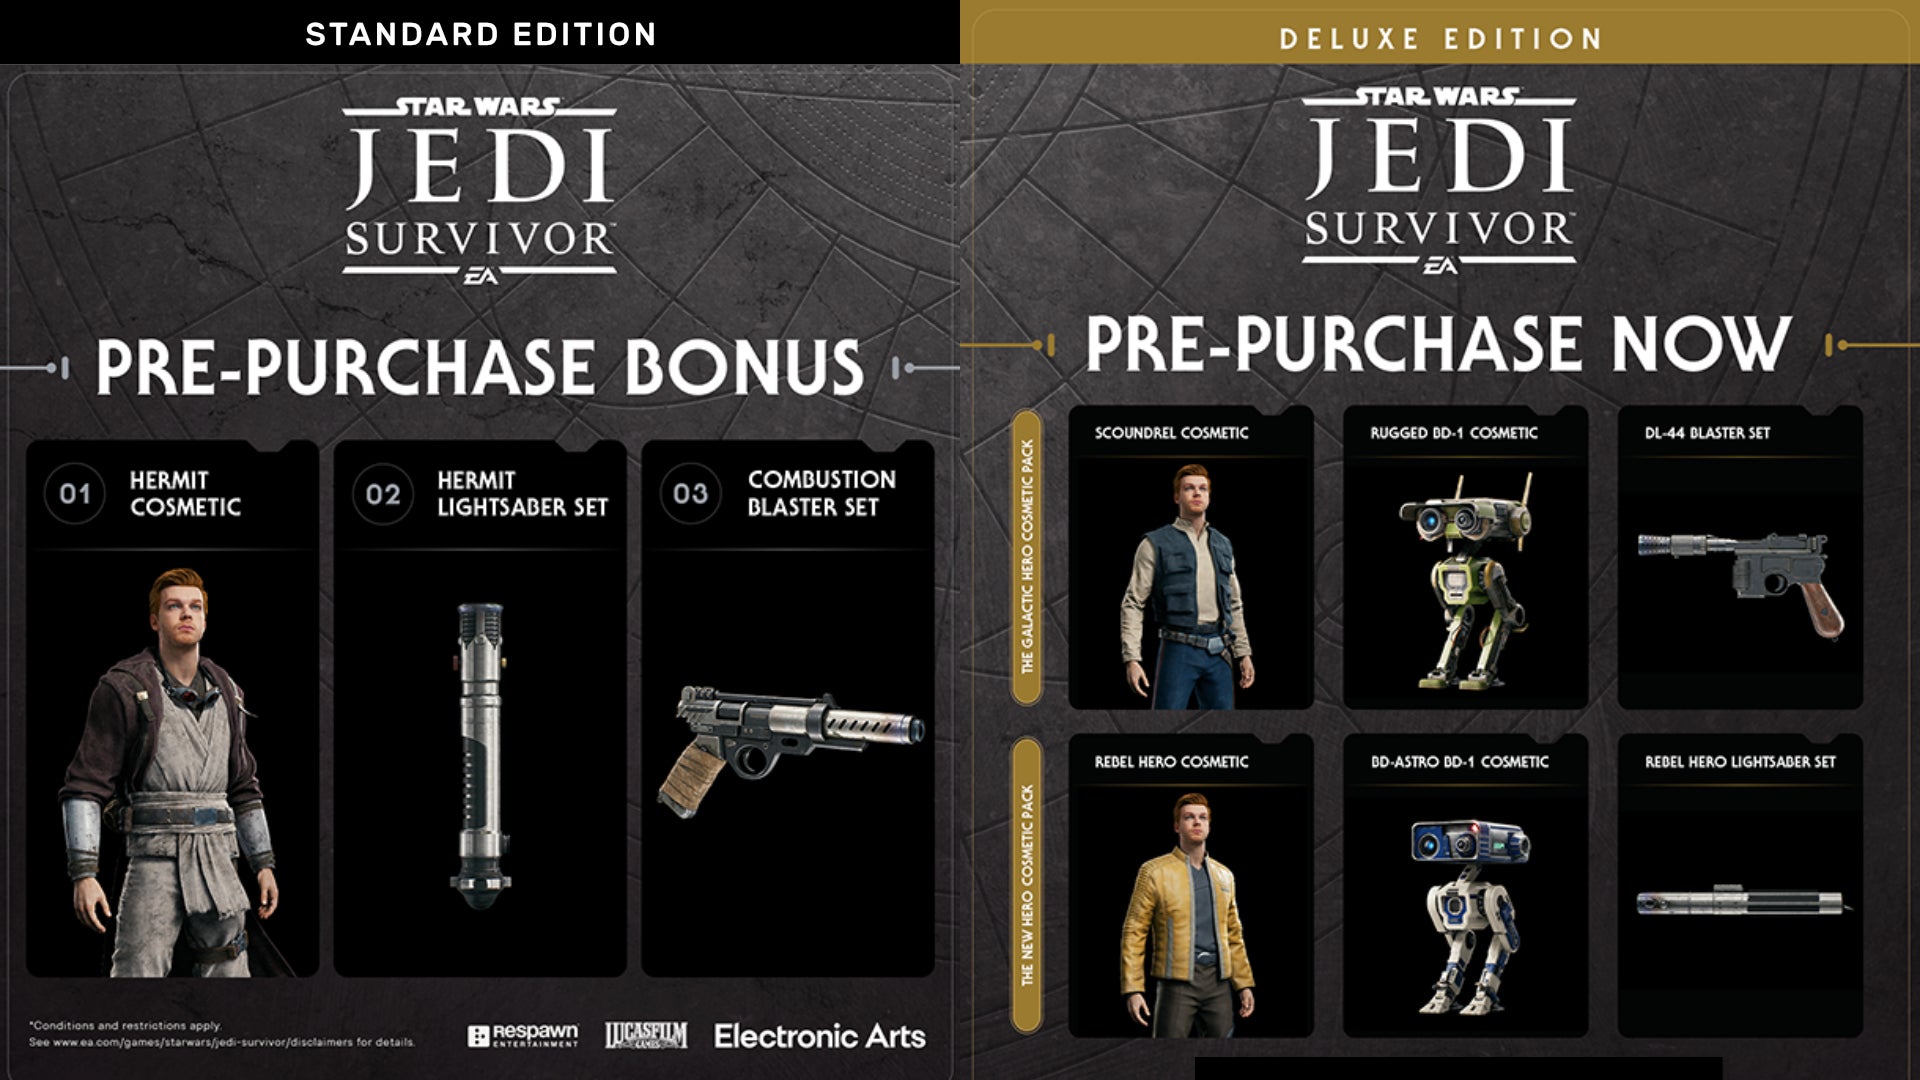 Two side-by-side panels showing the pre-order bonuses for both editions of Star Wars Jedi: Survivor.